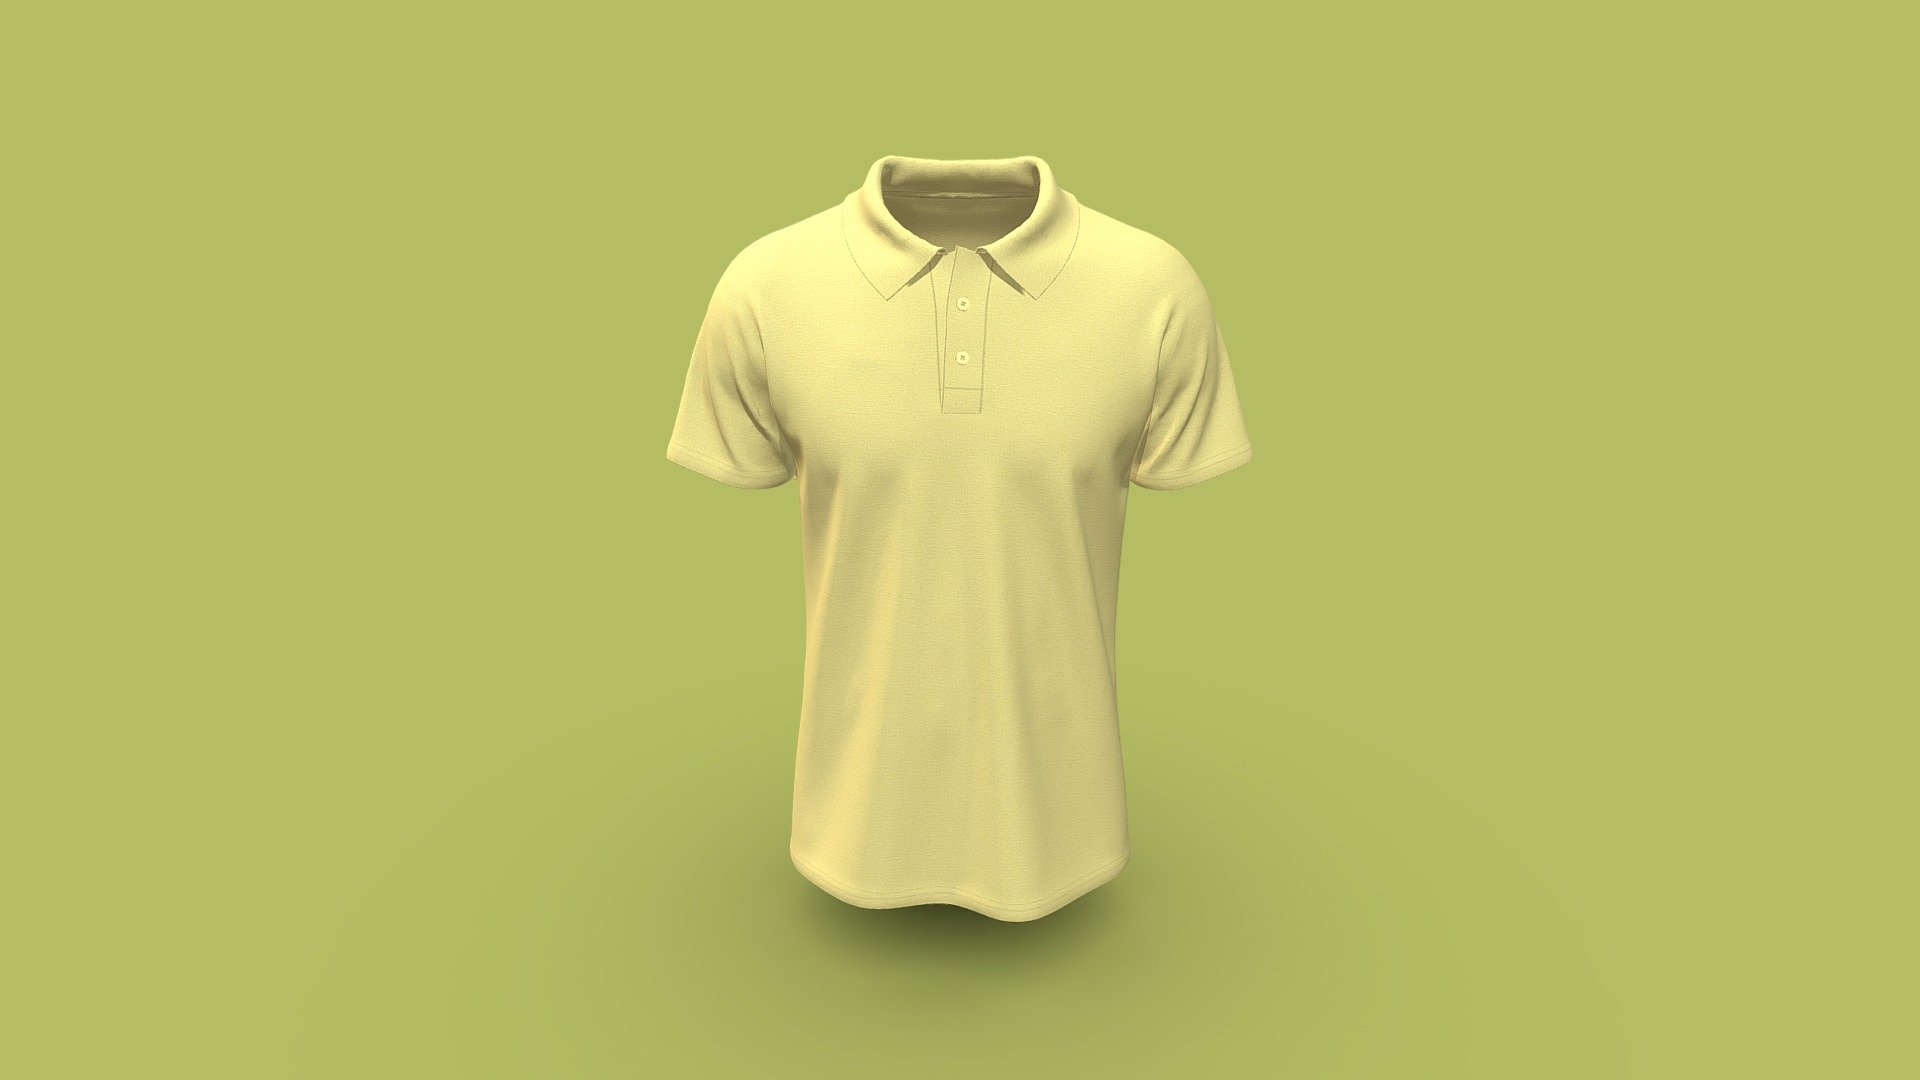 Cloth Title = Mens Knit Fashion Polo 

SKU = DG100201 

Category = Men 

Product Type = Polo 

Cloth Length = Regular 

Body Fit = Regular Fit 

Occasion = Casual  

Sleeve Style = Short Sleeve 


Our Services:

3D Apparel Design.

OBJ,FBX,GLTF Making with High/Low Poly.

Fabric Digitalization.

Mockup making.

3D Teck Pack.

Pattern Making.

2D Illustration.

Cloth Animation and 360 Spin Video.


Contact us:- 

Email: info@digitalfashionwear.com 

Website: https://digitalfashionwear.com 


We designed all the types of cloth specially focused on product visualization, e-commerce, fitting, and production. 

We will design: 

T-shirts 

Polo shirts 

Hoodies 

Sweatshirt 

Jackets 

Shirts 

TankTops 

Trousers 

Bras 

Underwear 

Blazer 

Aprons 

Leggings 

and All Fashion items. 





Our goal is to make sure what we provide you, meets your demand 3d model